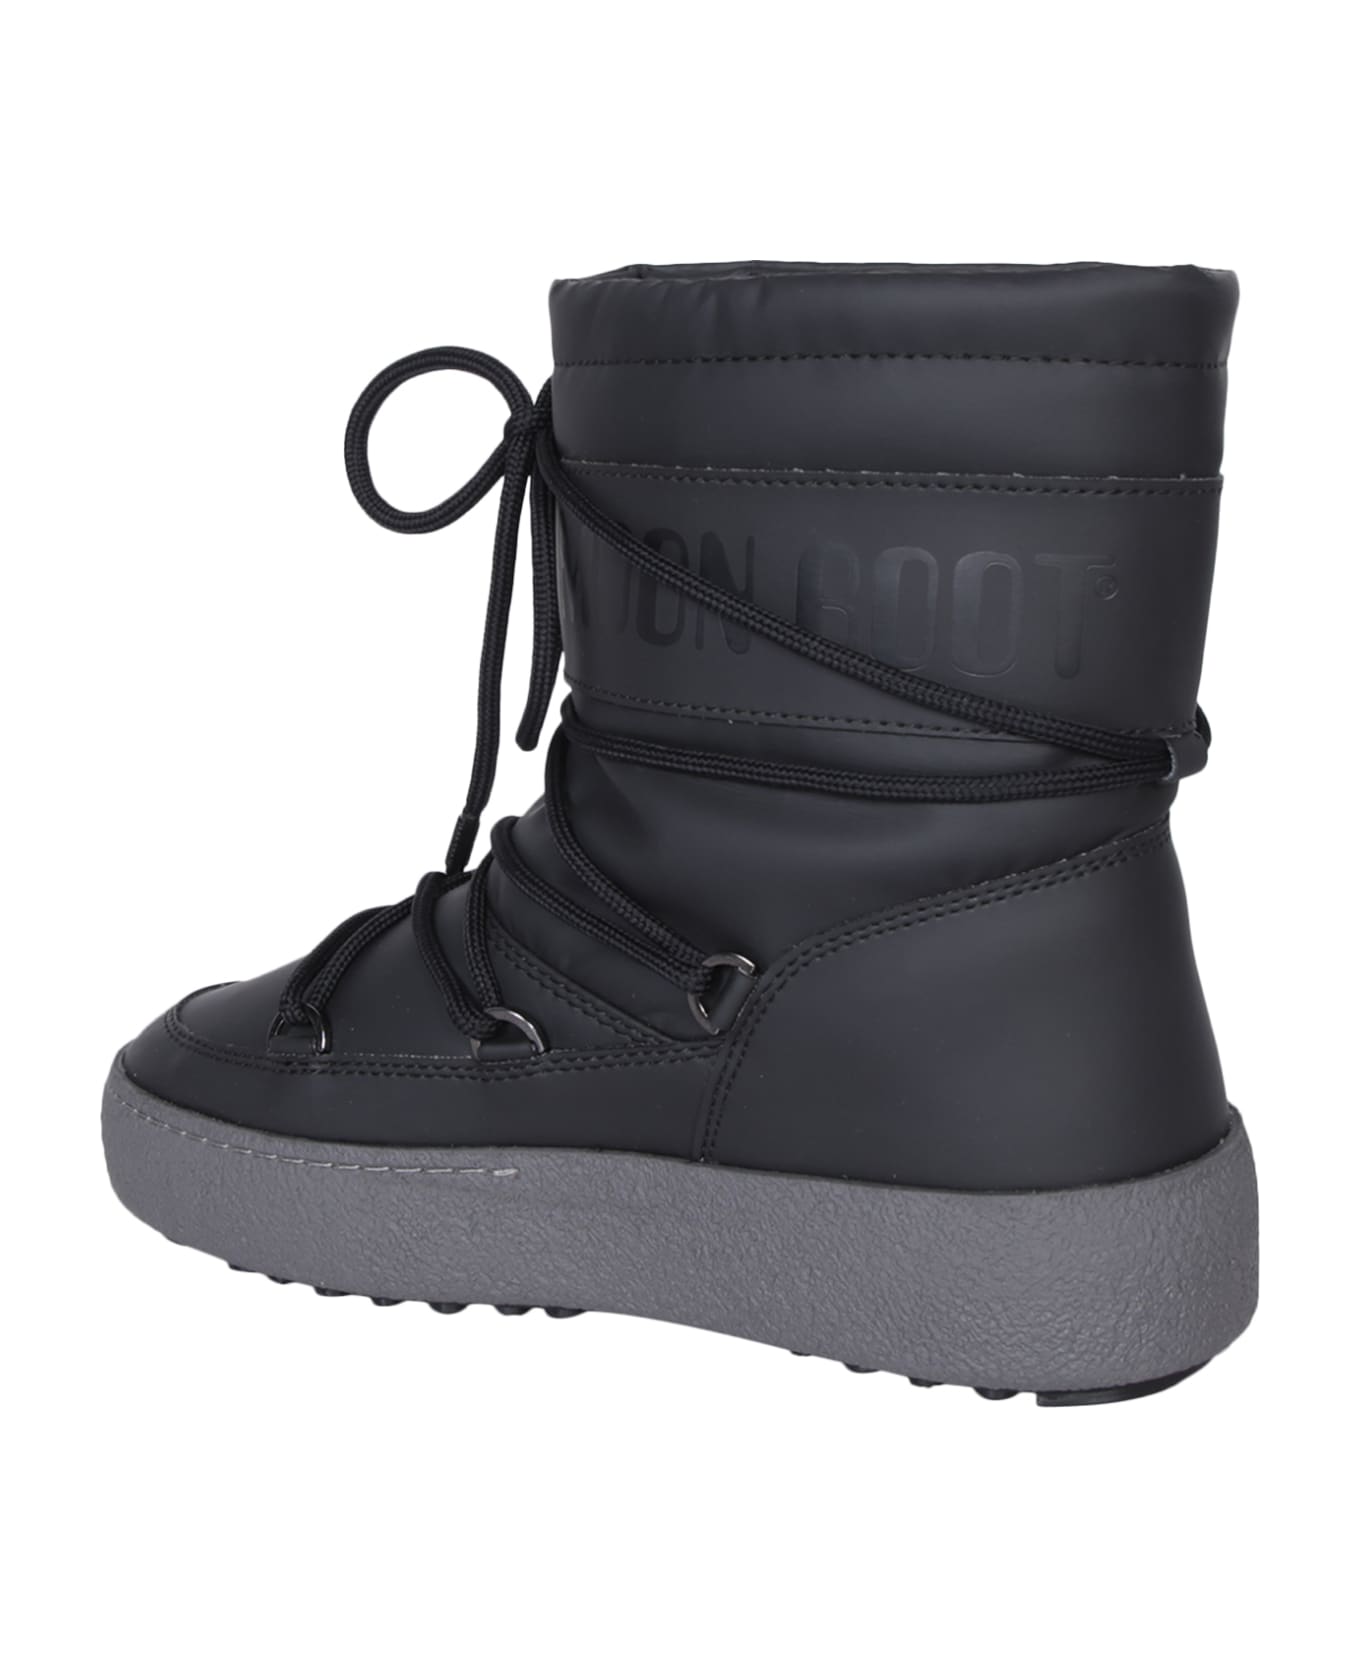 Moon Boot Mtrack Tube Black Ankle Boot - Black ブーツ